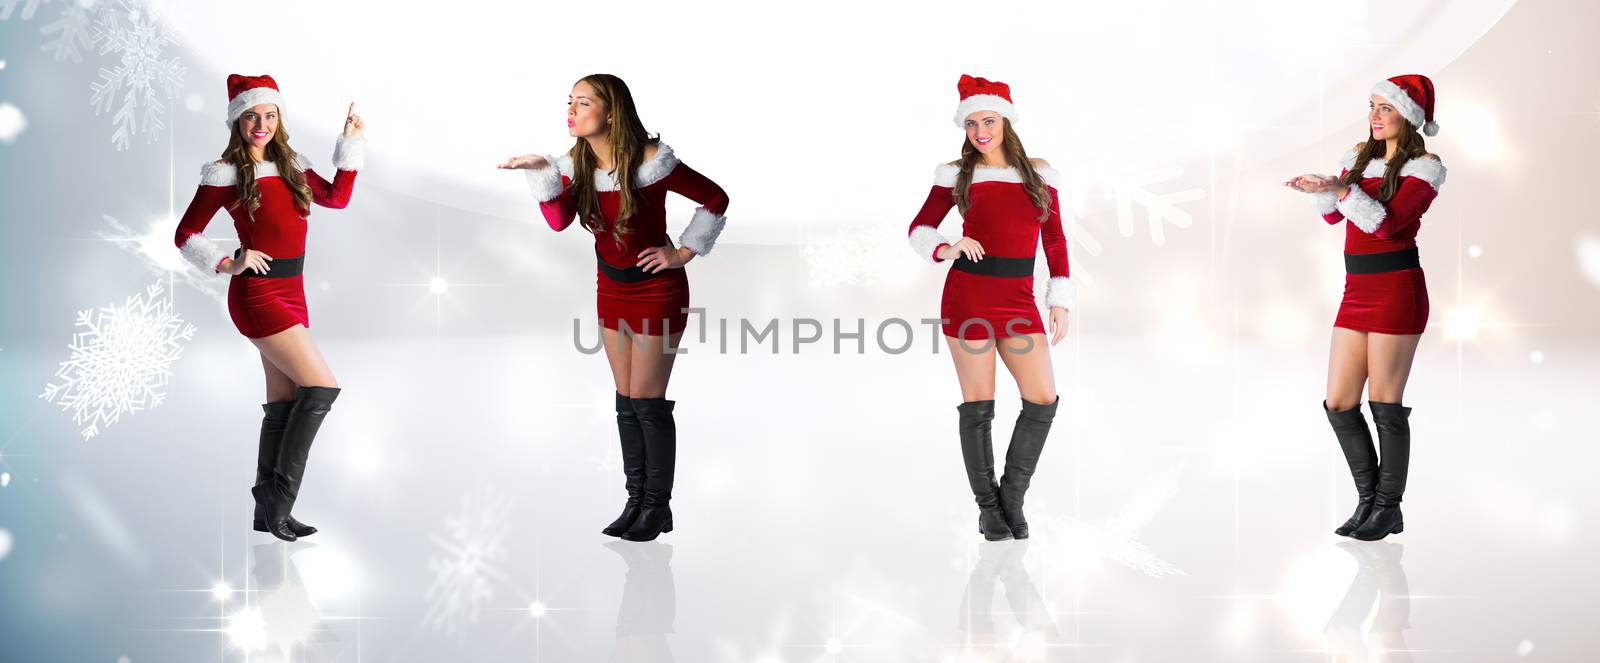 Composite image of different festive blondes against lights twinkling in modern room